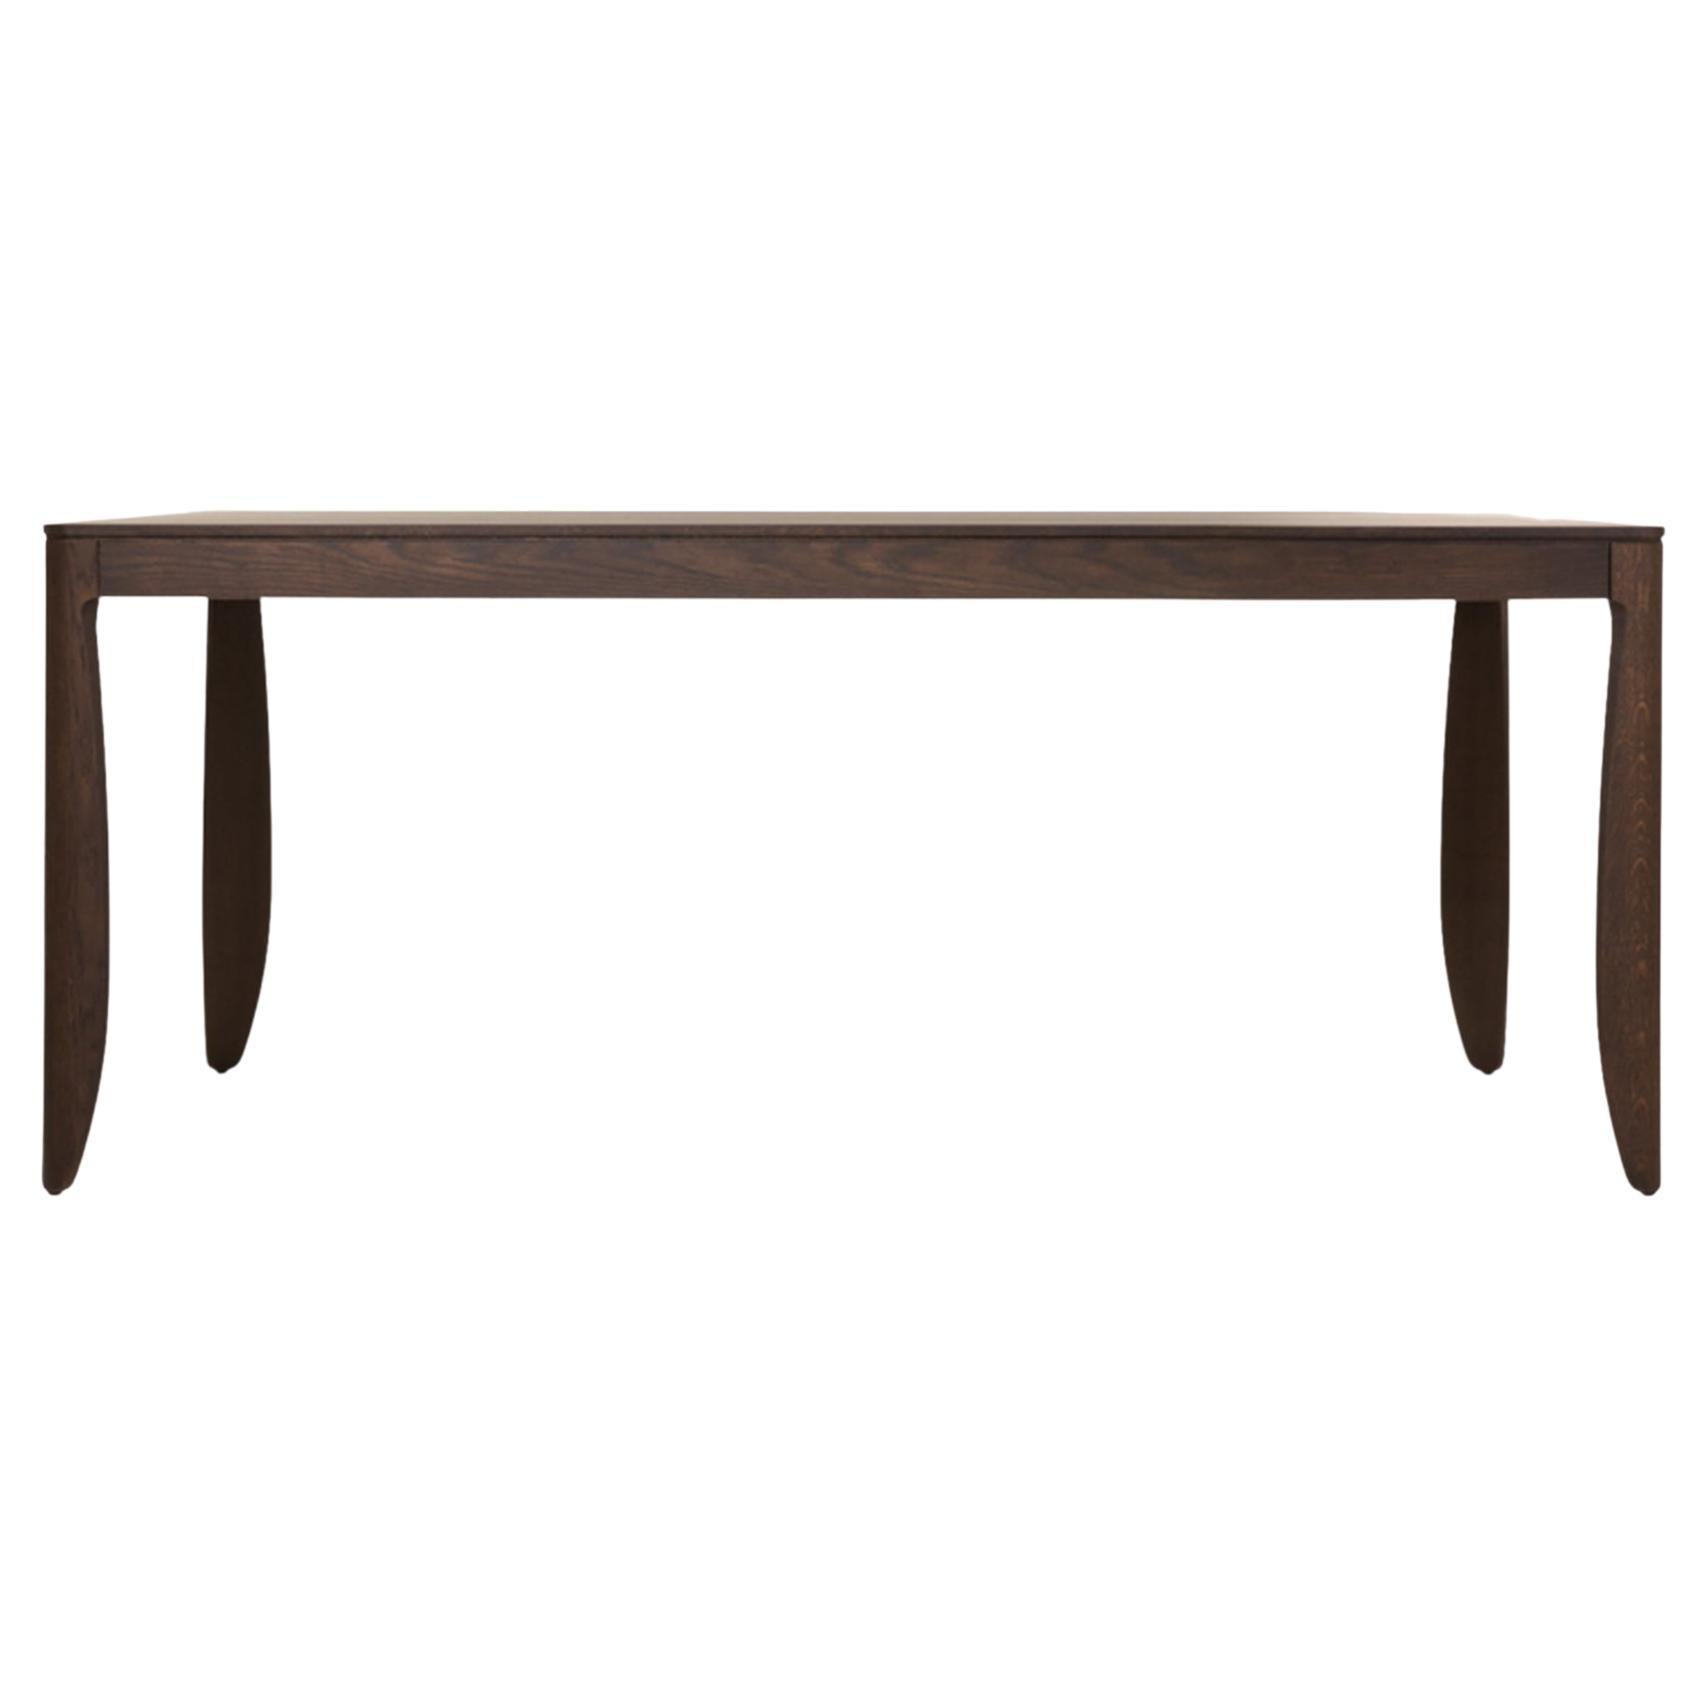 Moooi Monster Small Table Wenge Stained Oak by Marcel Wanders Studio For Sale